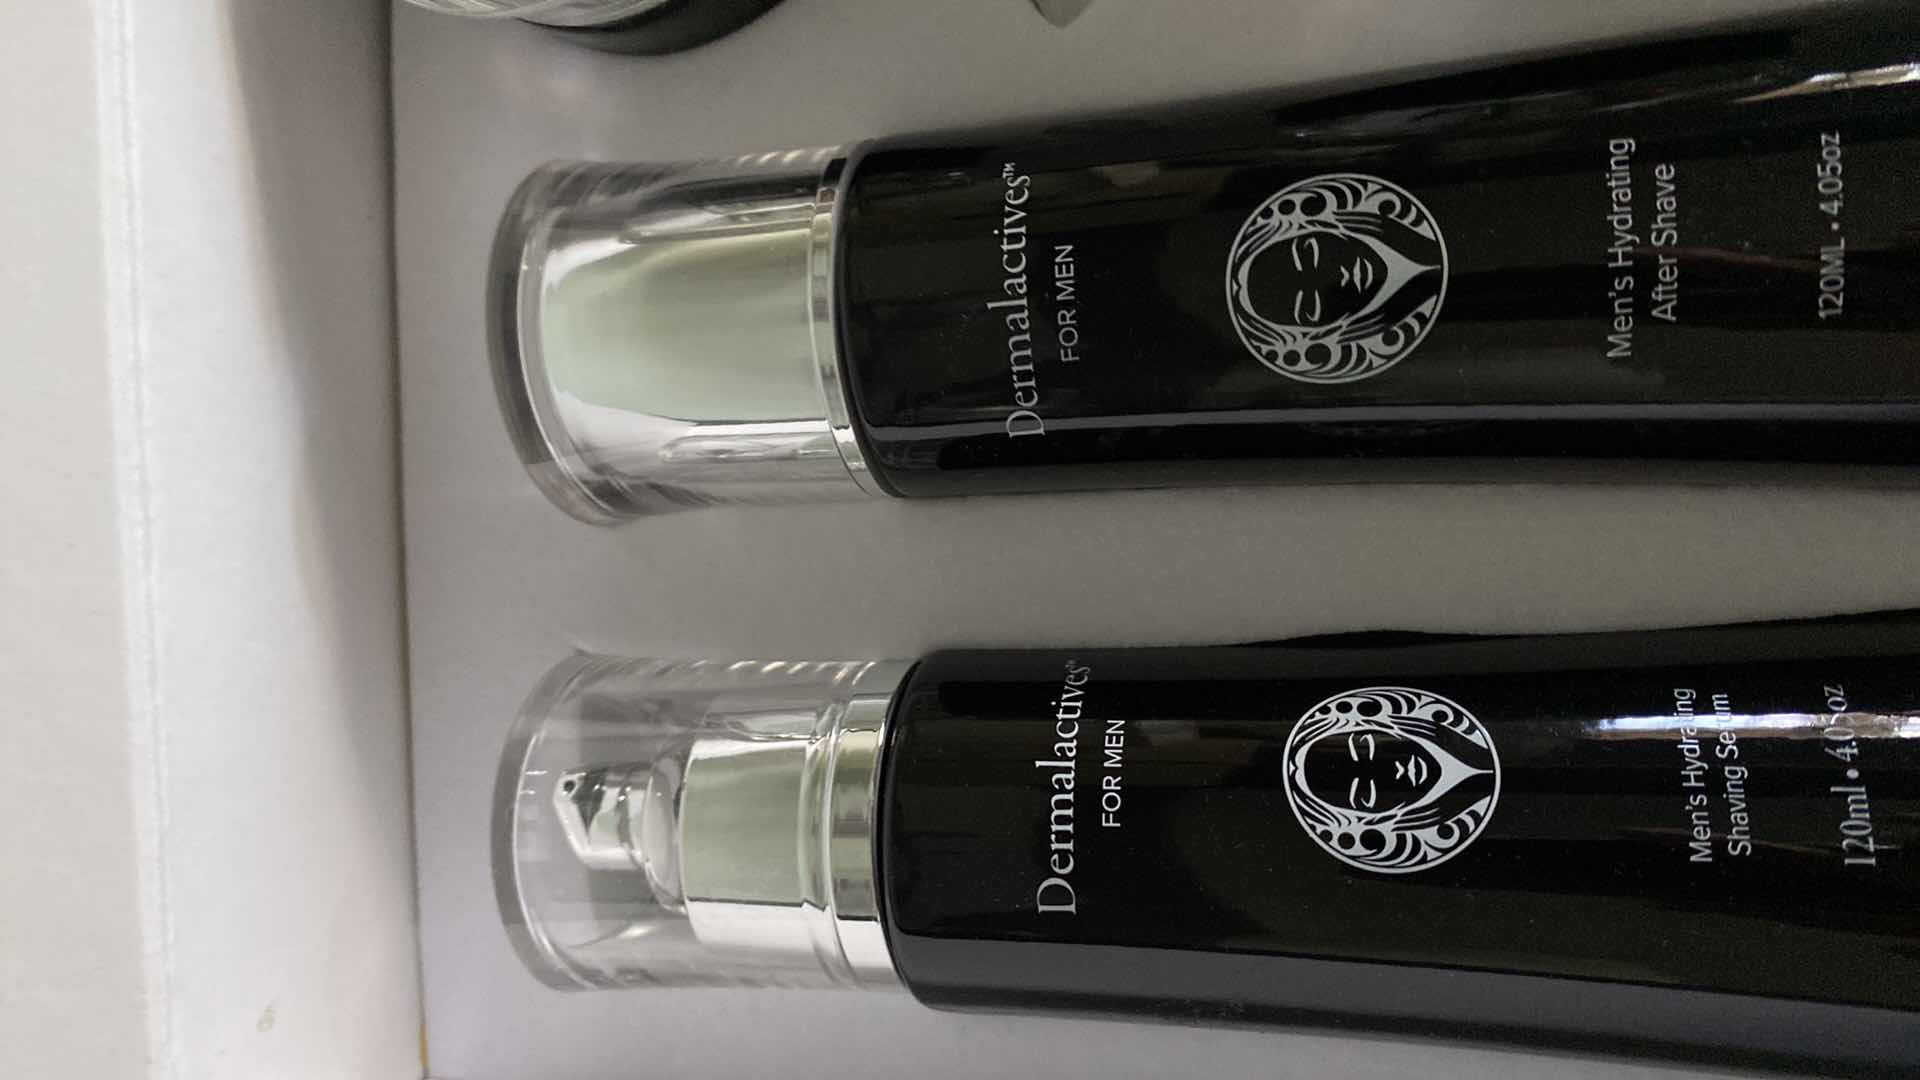 Photo 2 of DERMALACTIVES MEN’S HYDRATING 4 PIECE FACIAL COLLECTION SHAVING SERUM, AFTER SHAVE, MOISTURIZER AND FACIAL PEEL